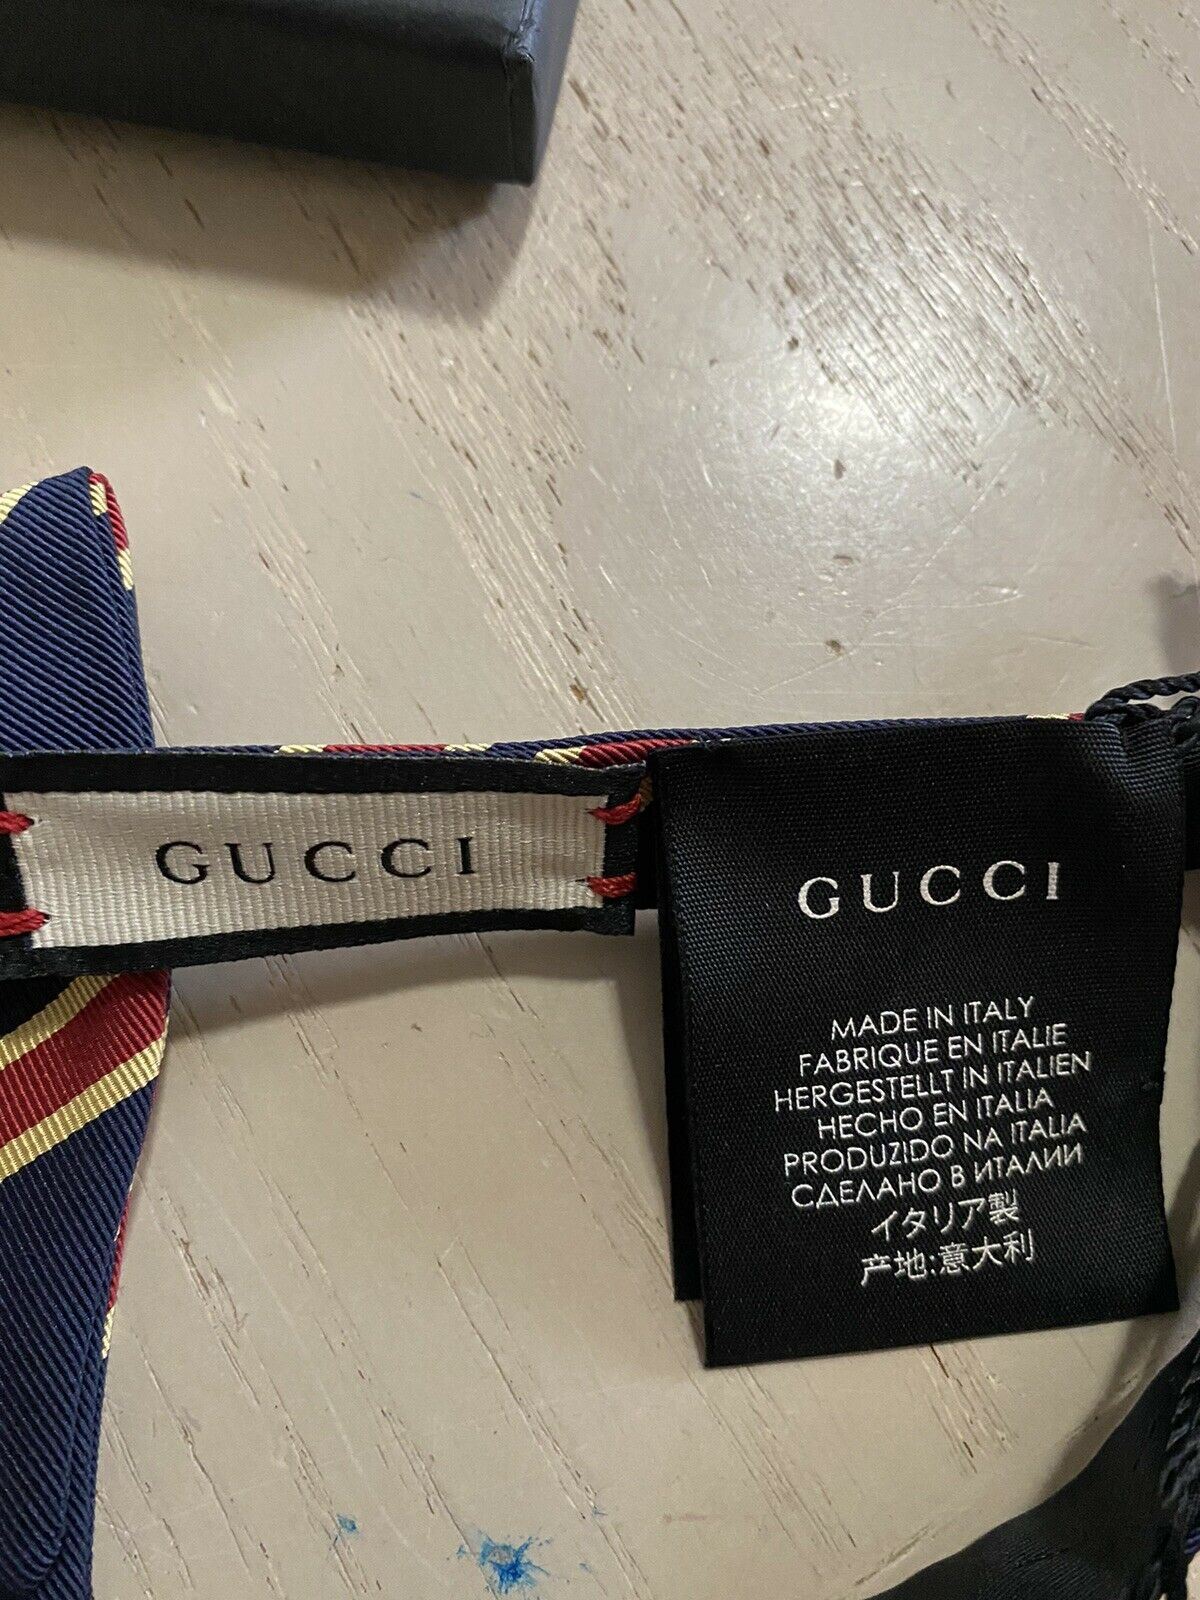 New  Gucci  Bow Tie Blue/Red Made in Italy